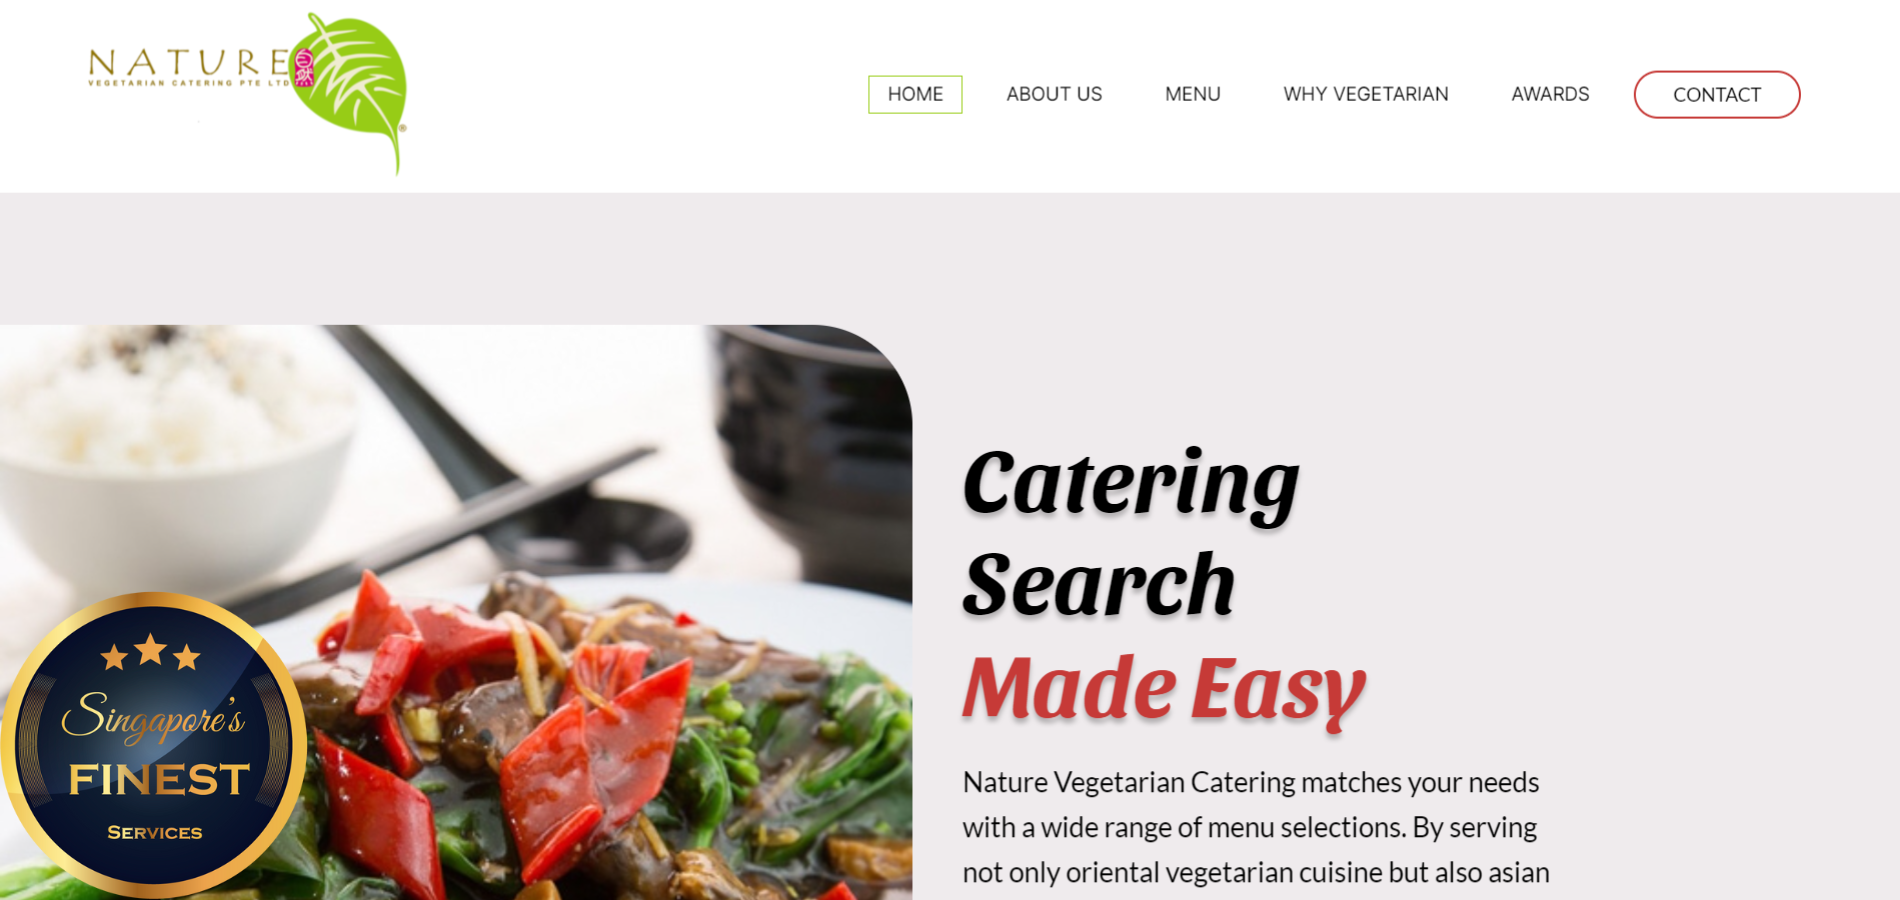 The Finest Vegetarian Catering Services in Singapore